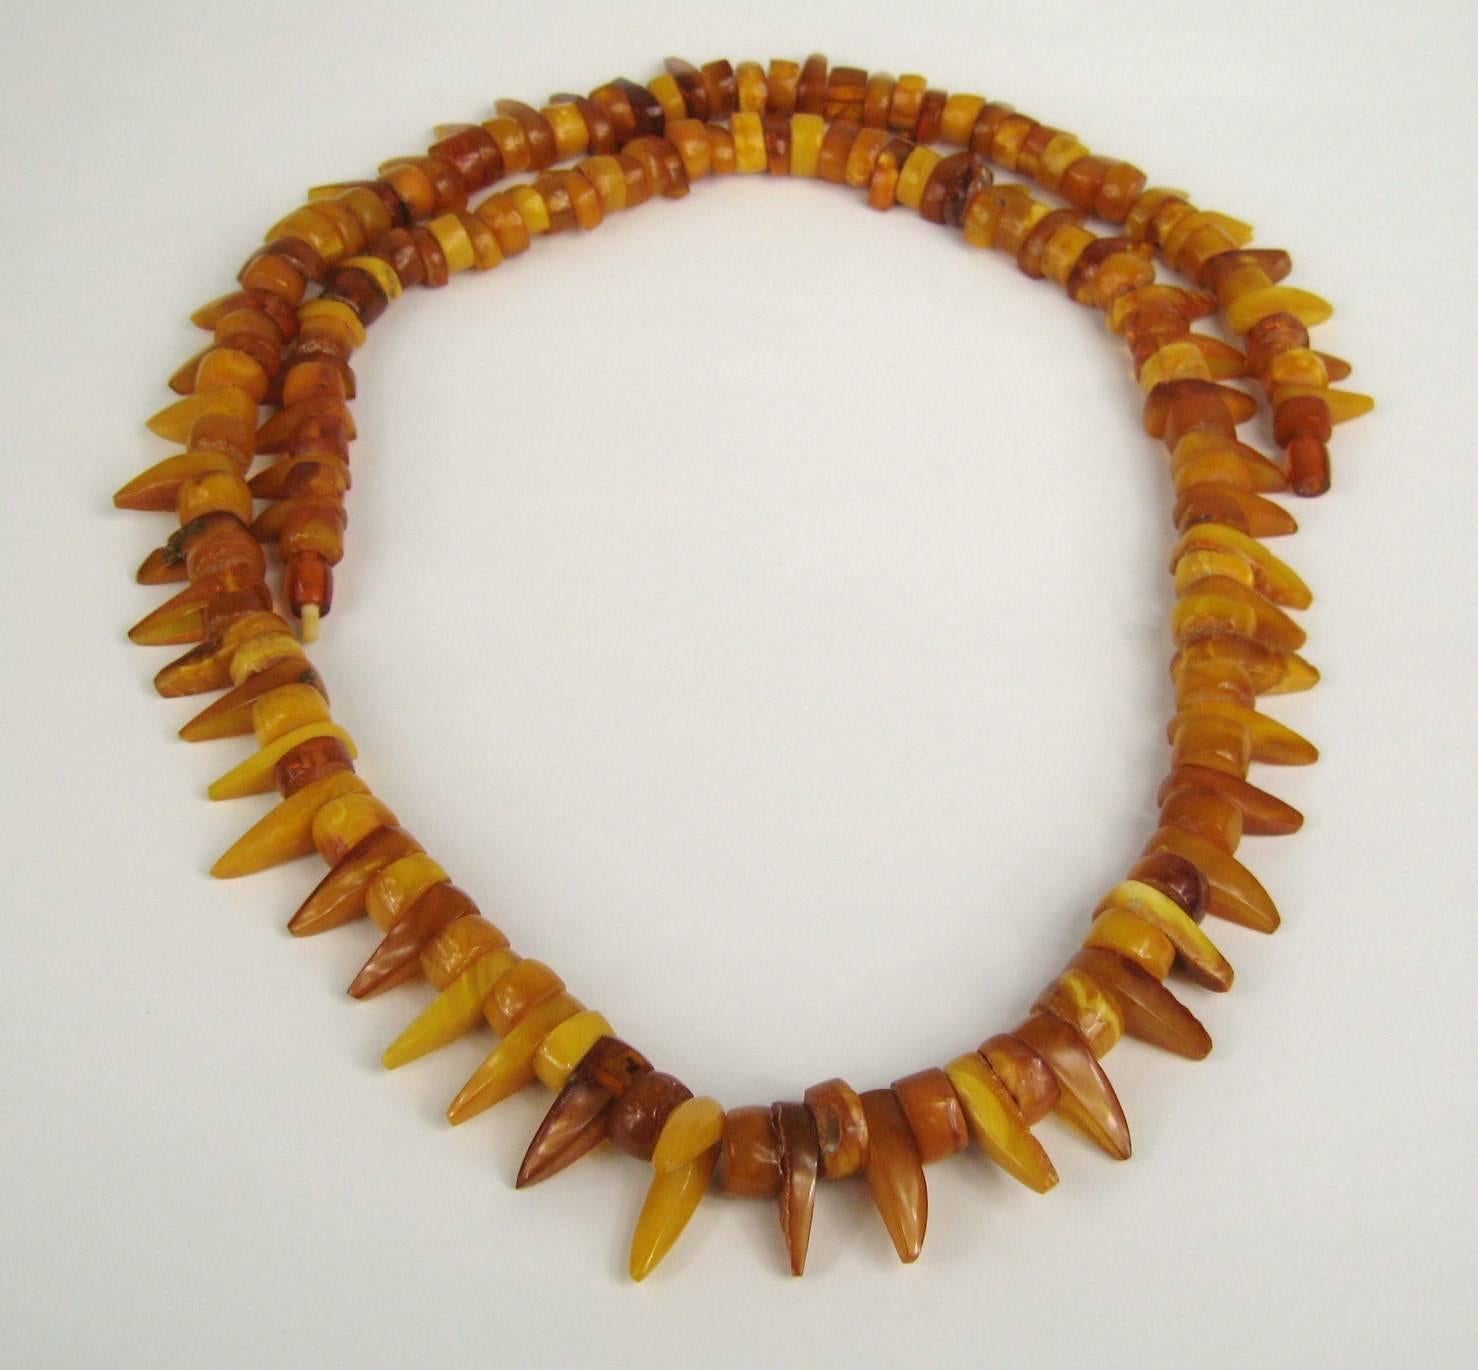 Both disc and elongated pieces of amber are strung together 
Long Necklace amber
AMBER is between 30 - 90 million years old
Measuring 
41